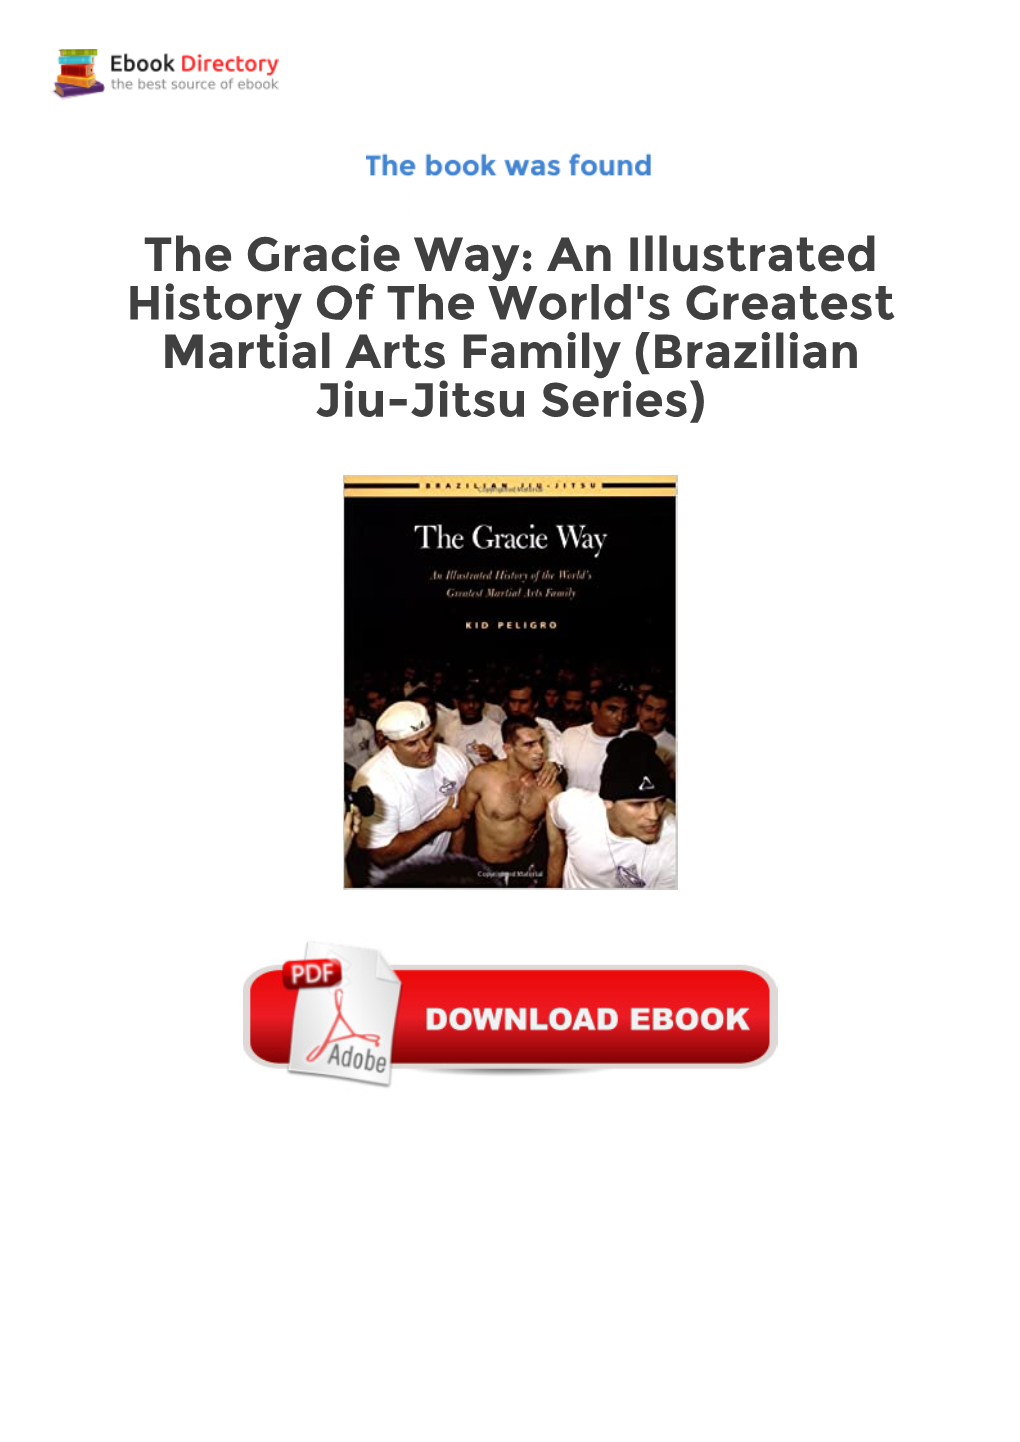 The Gracie Way: an Illustrated History of the World's Greatest Martial Arts